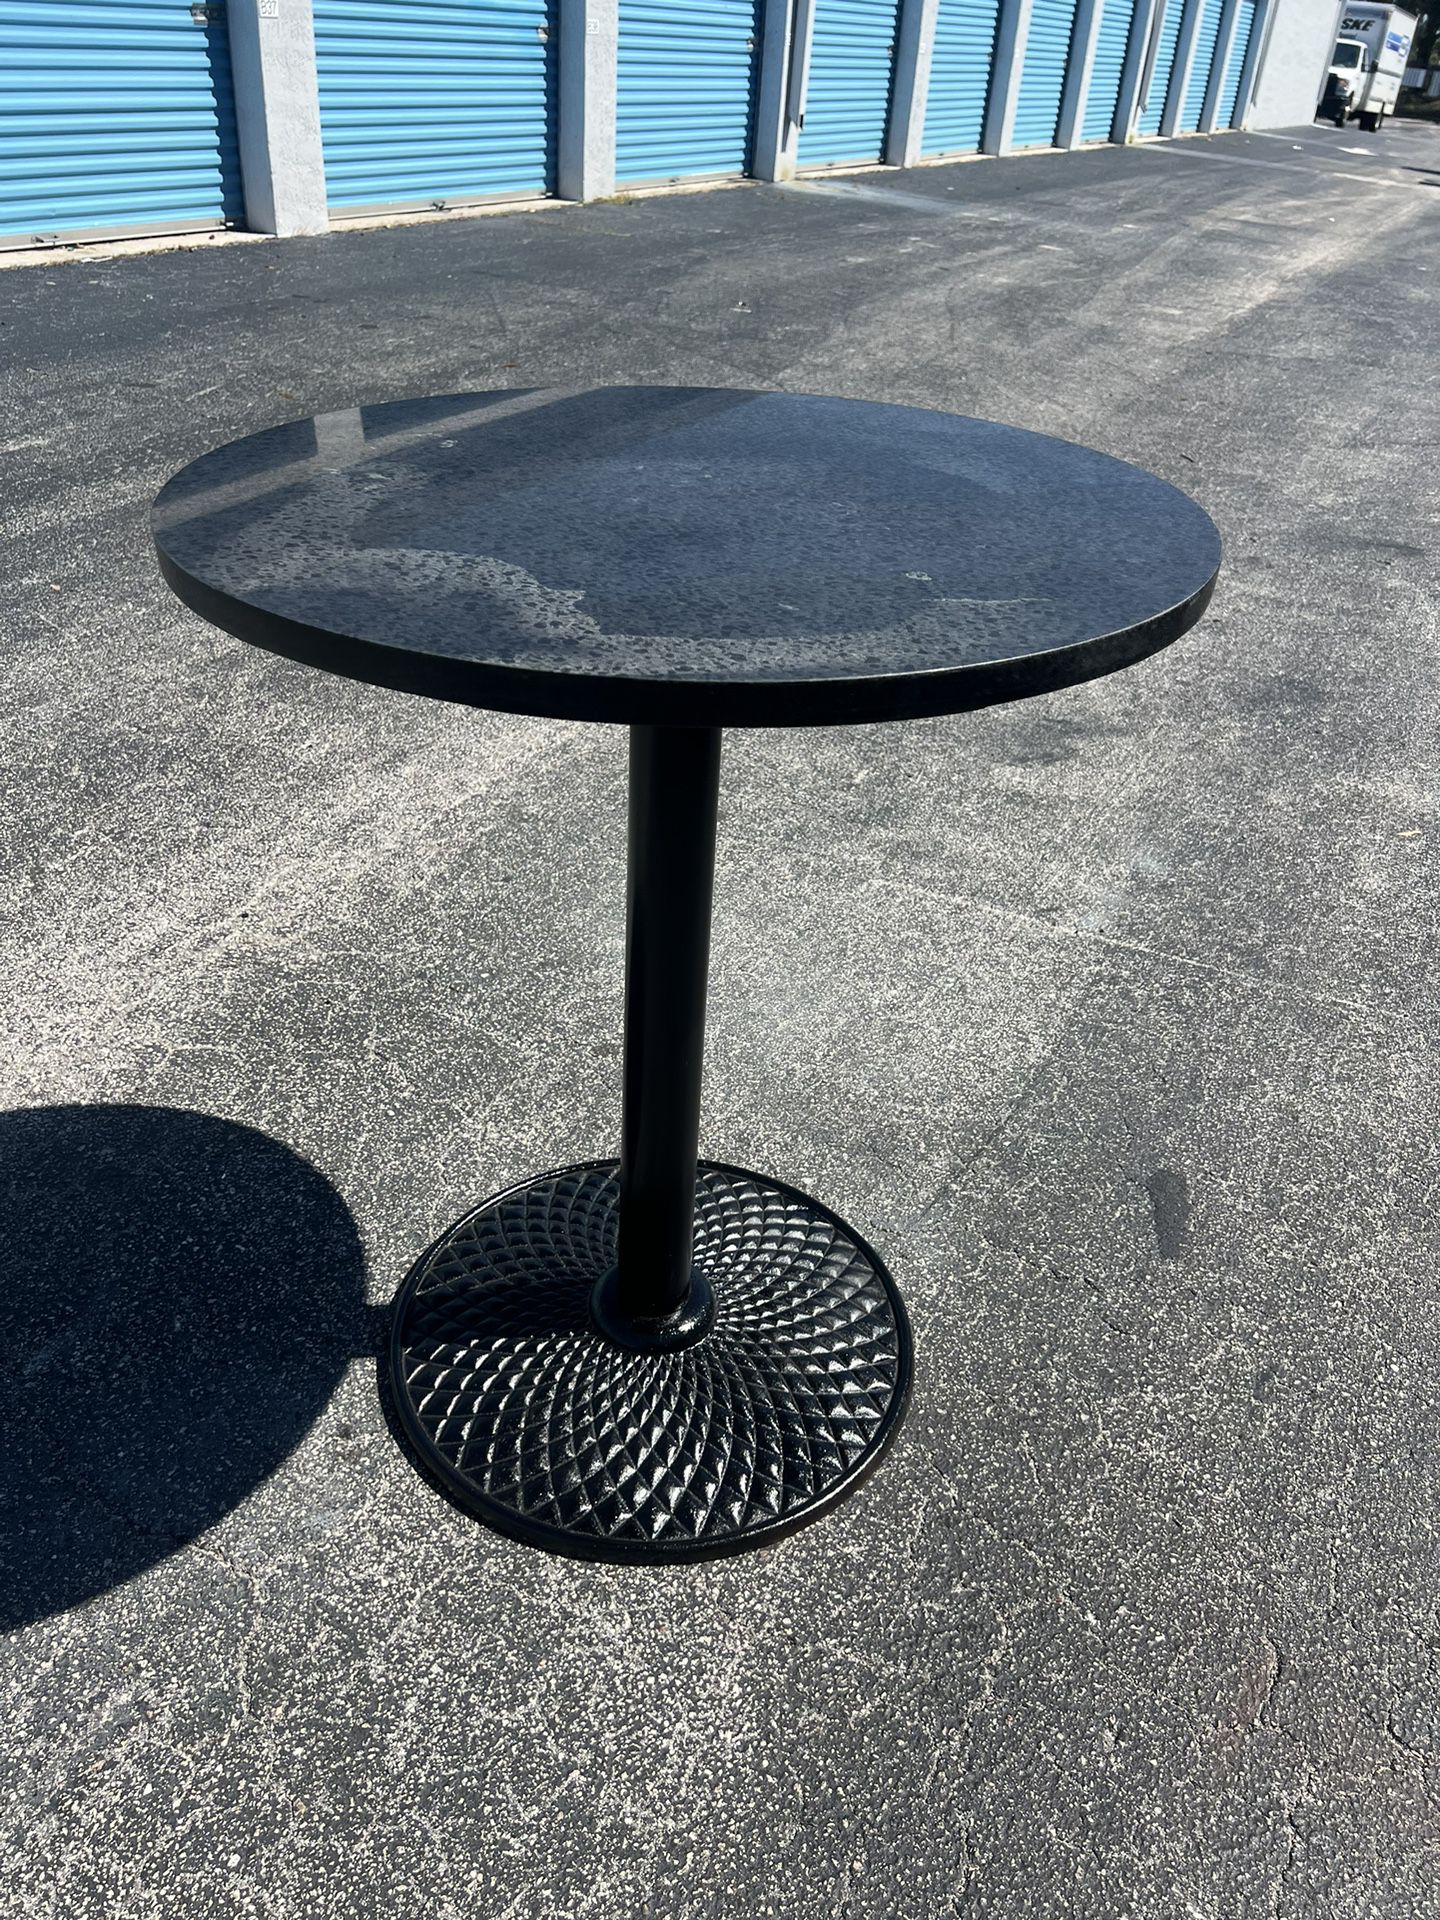 Black Round Dark Stone Top Iron Base Outdoor Indoor Patio Cocktail Dining 36” Tall Bistro Table! Some discoloration on part of stone top otherwise gre